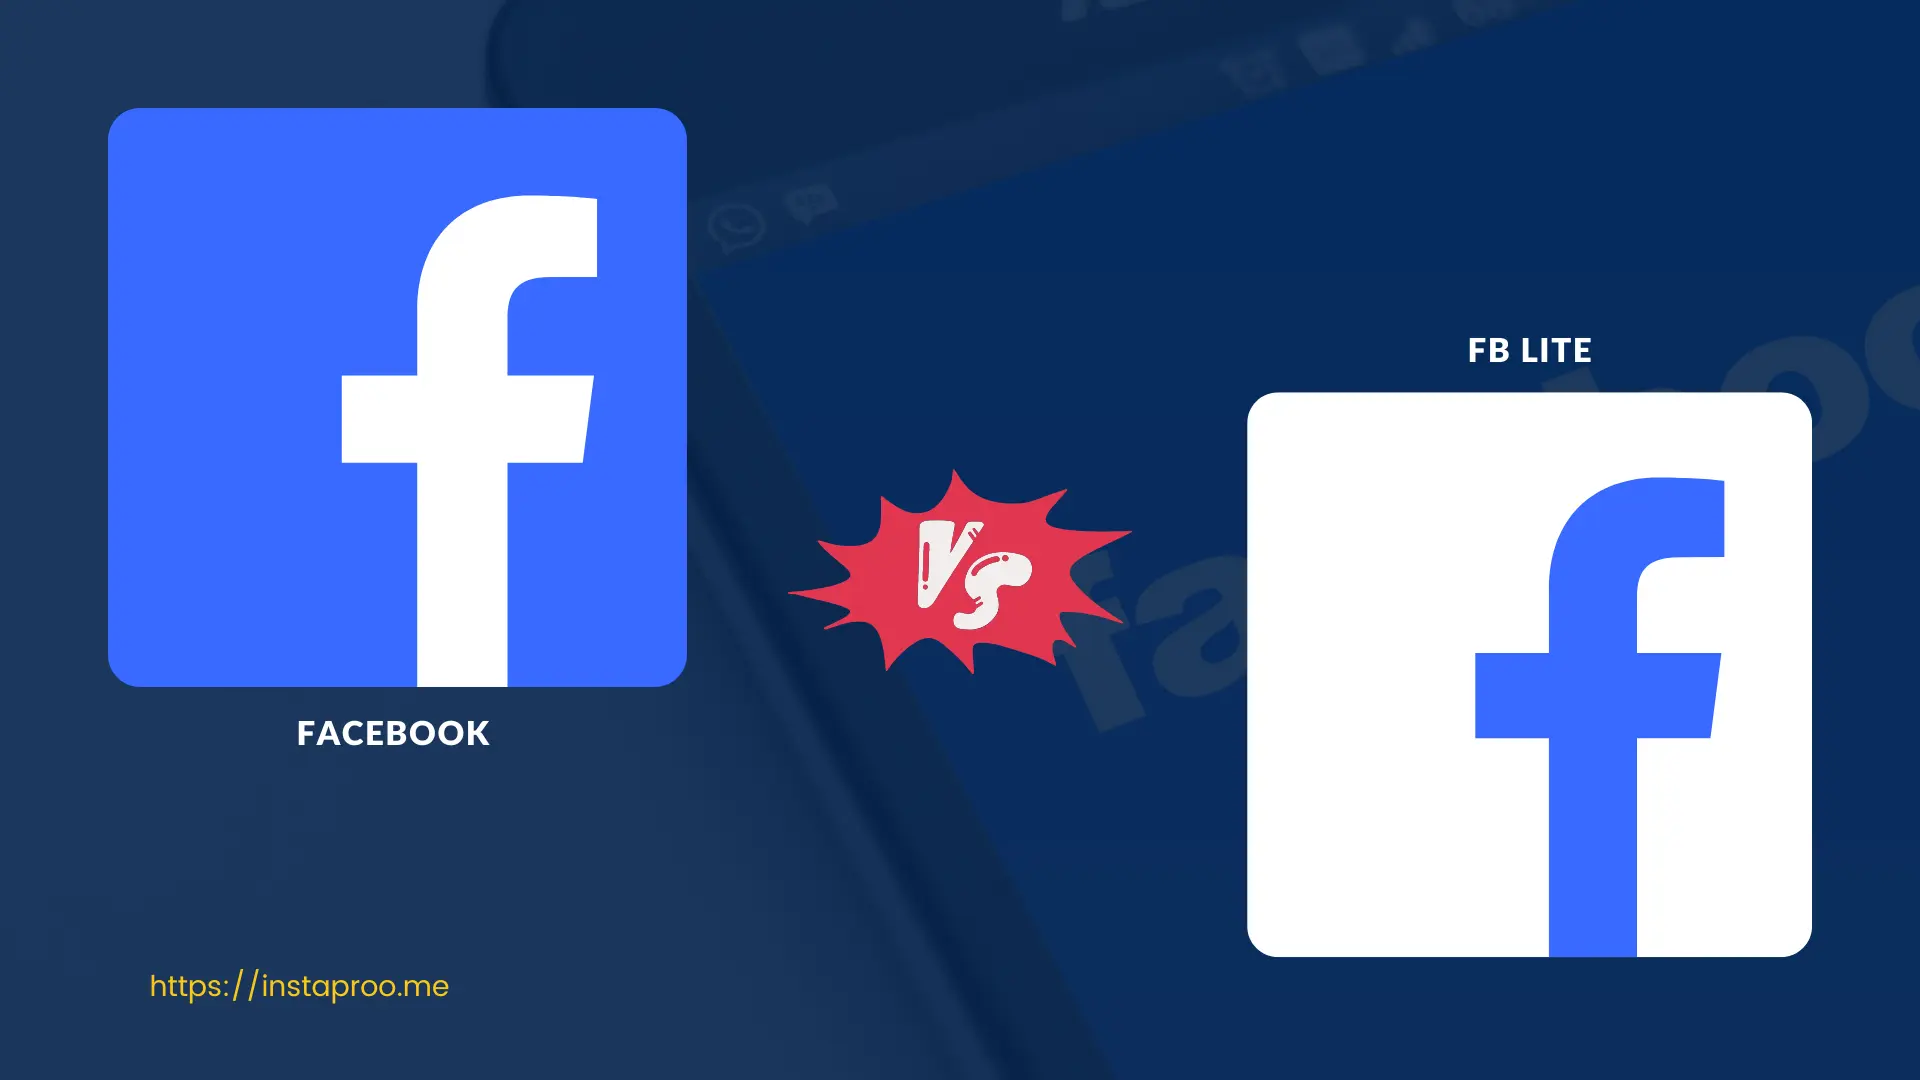 Difference Between Facebook and Facebook Lite